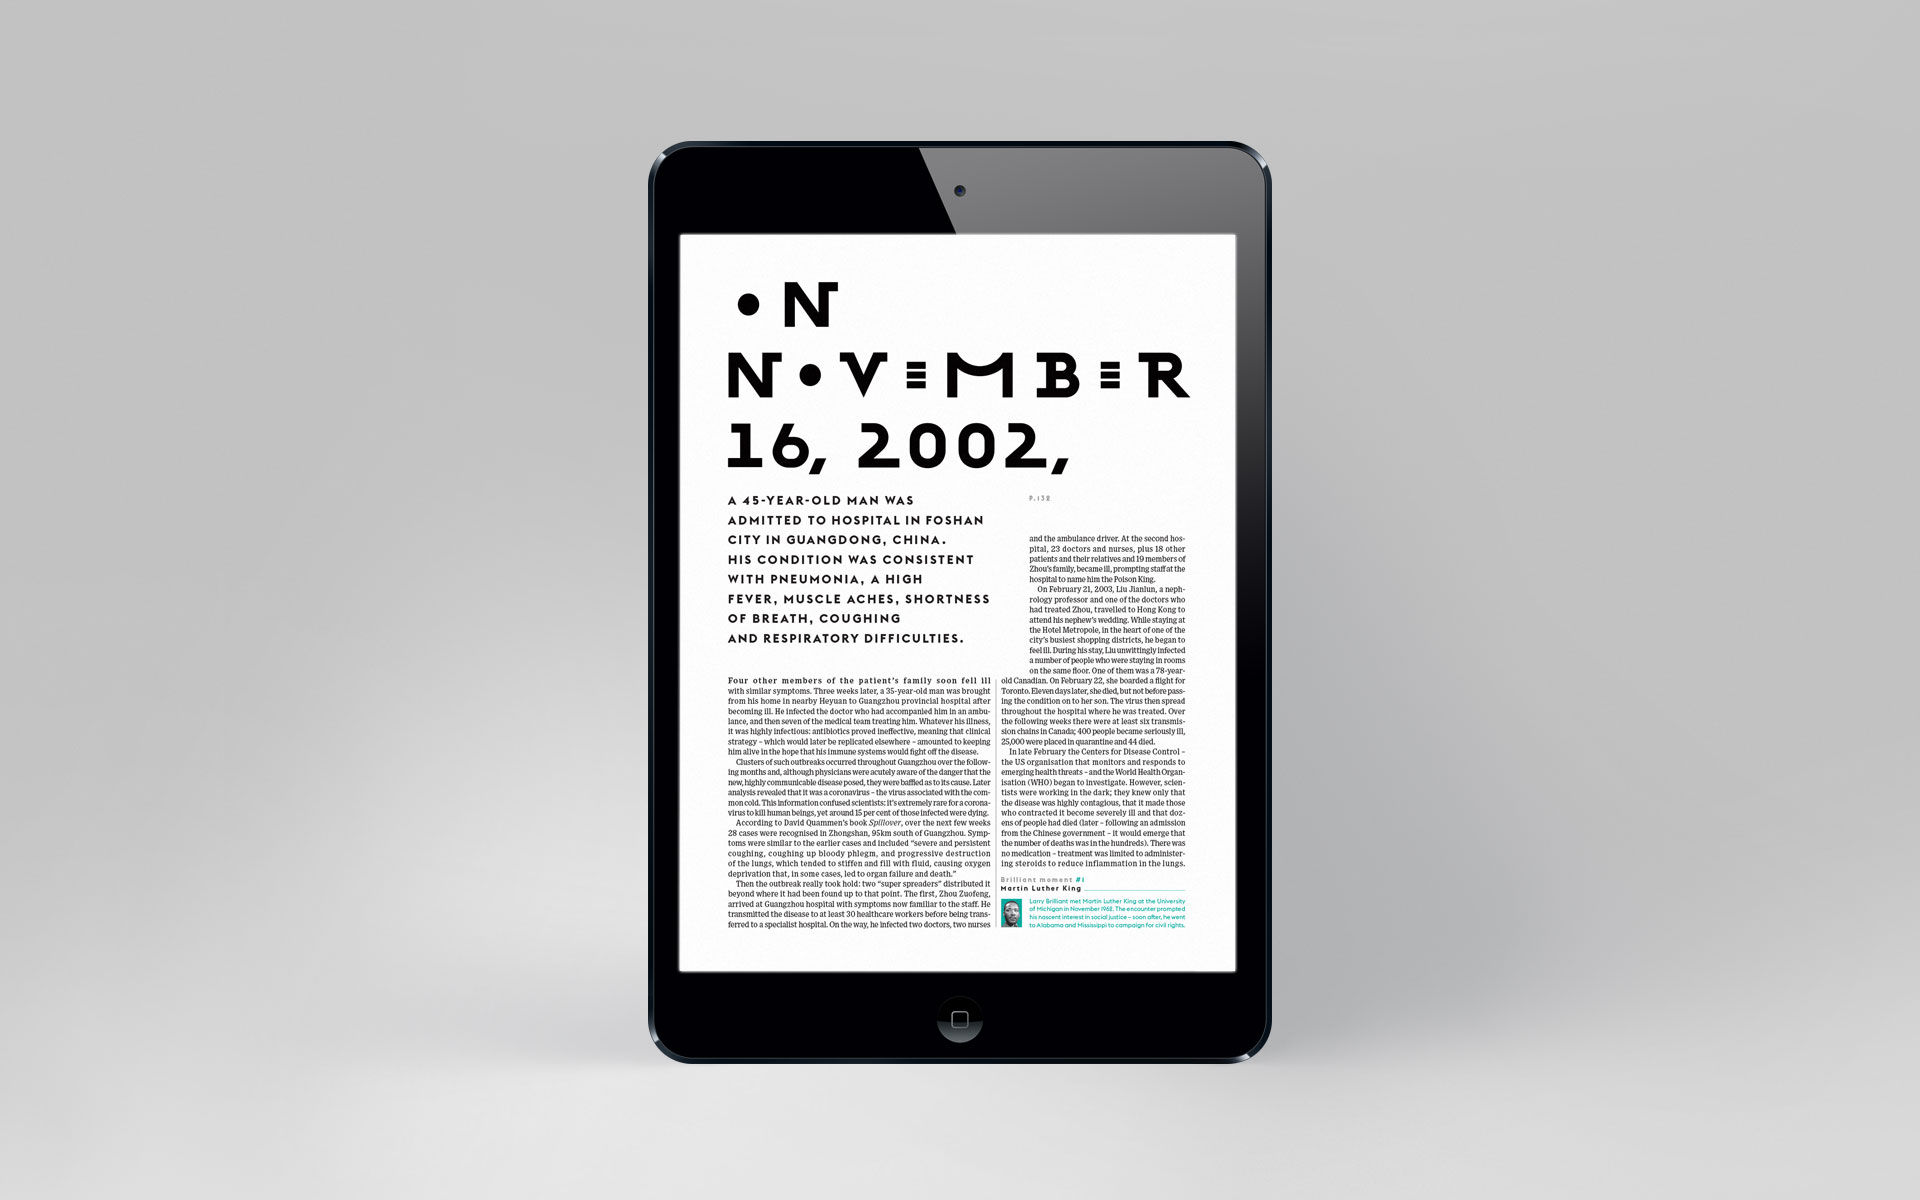 Typeface for Wired / Sawdust